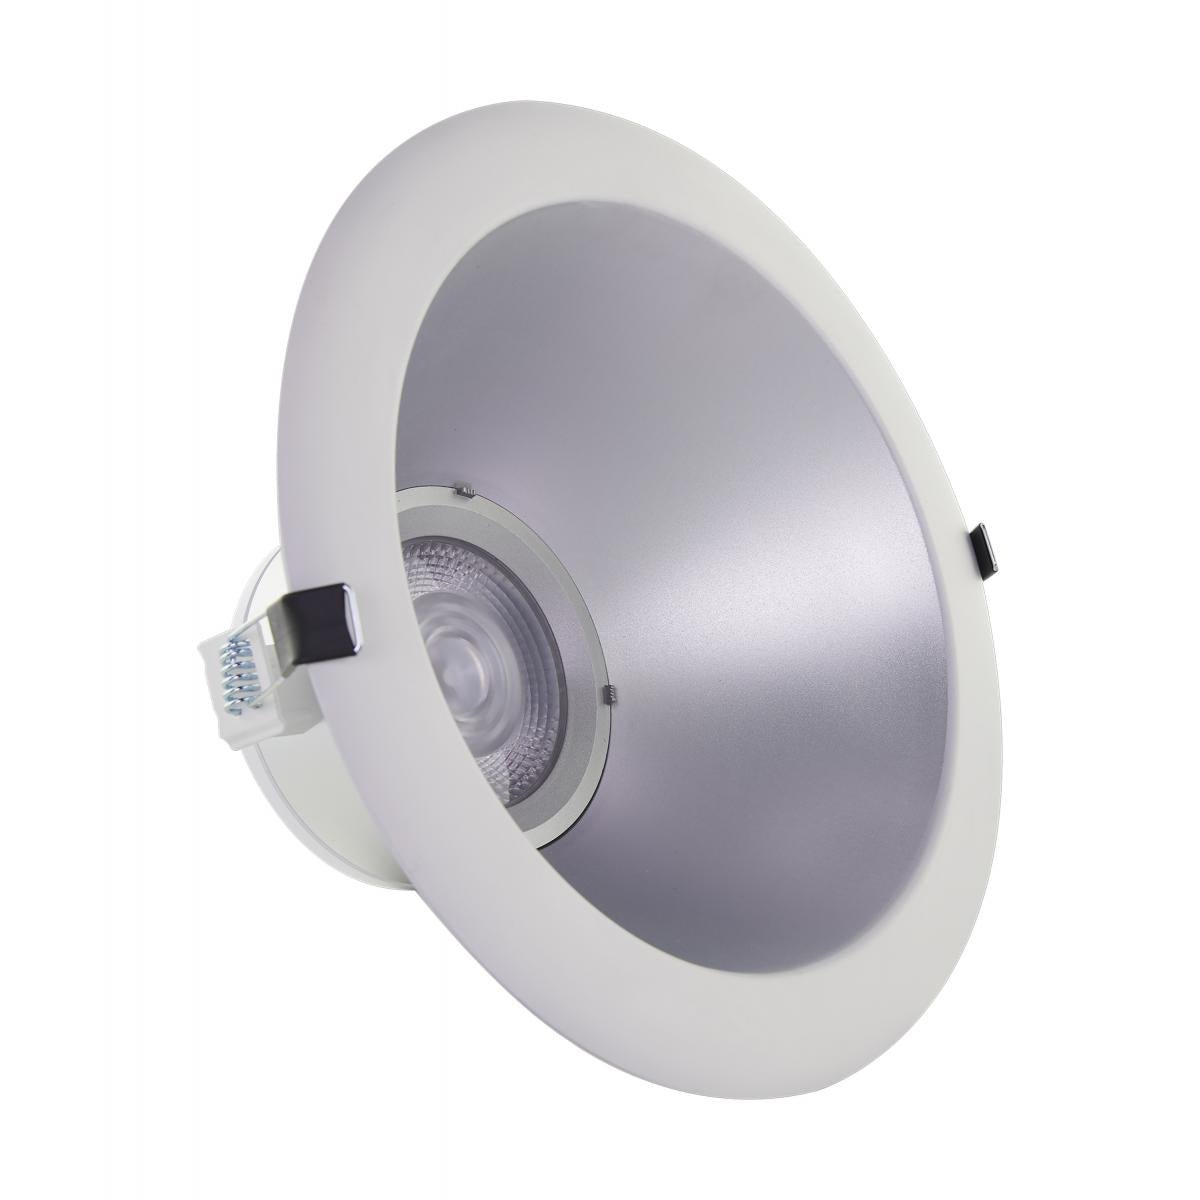 SATCO-S11814SATCO S11810 S11814 14.5W LED 4" Round Downlight Selectable CCT Selectable Lumen